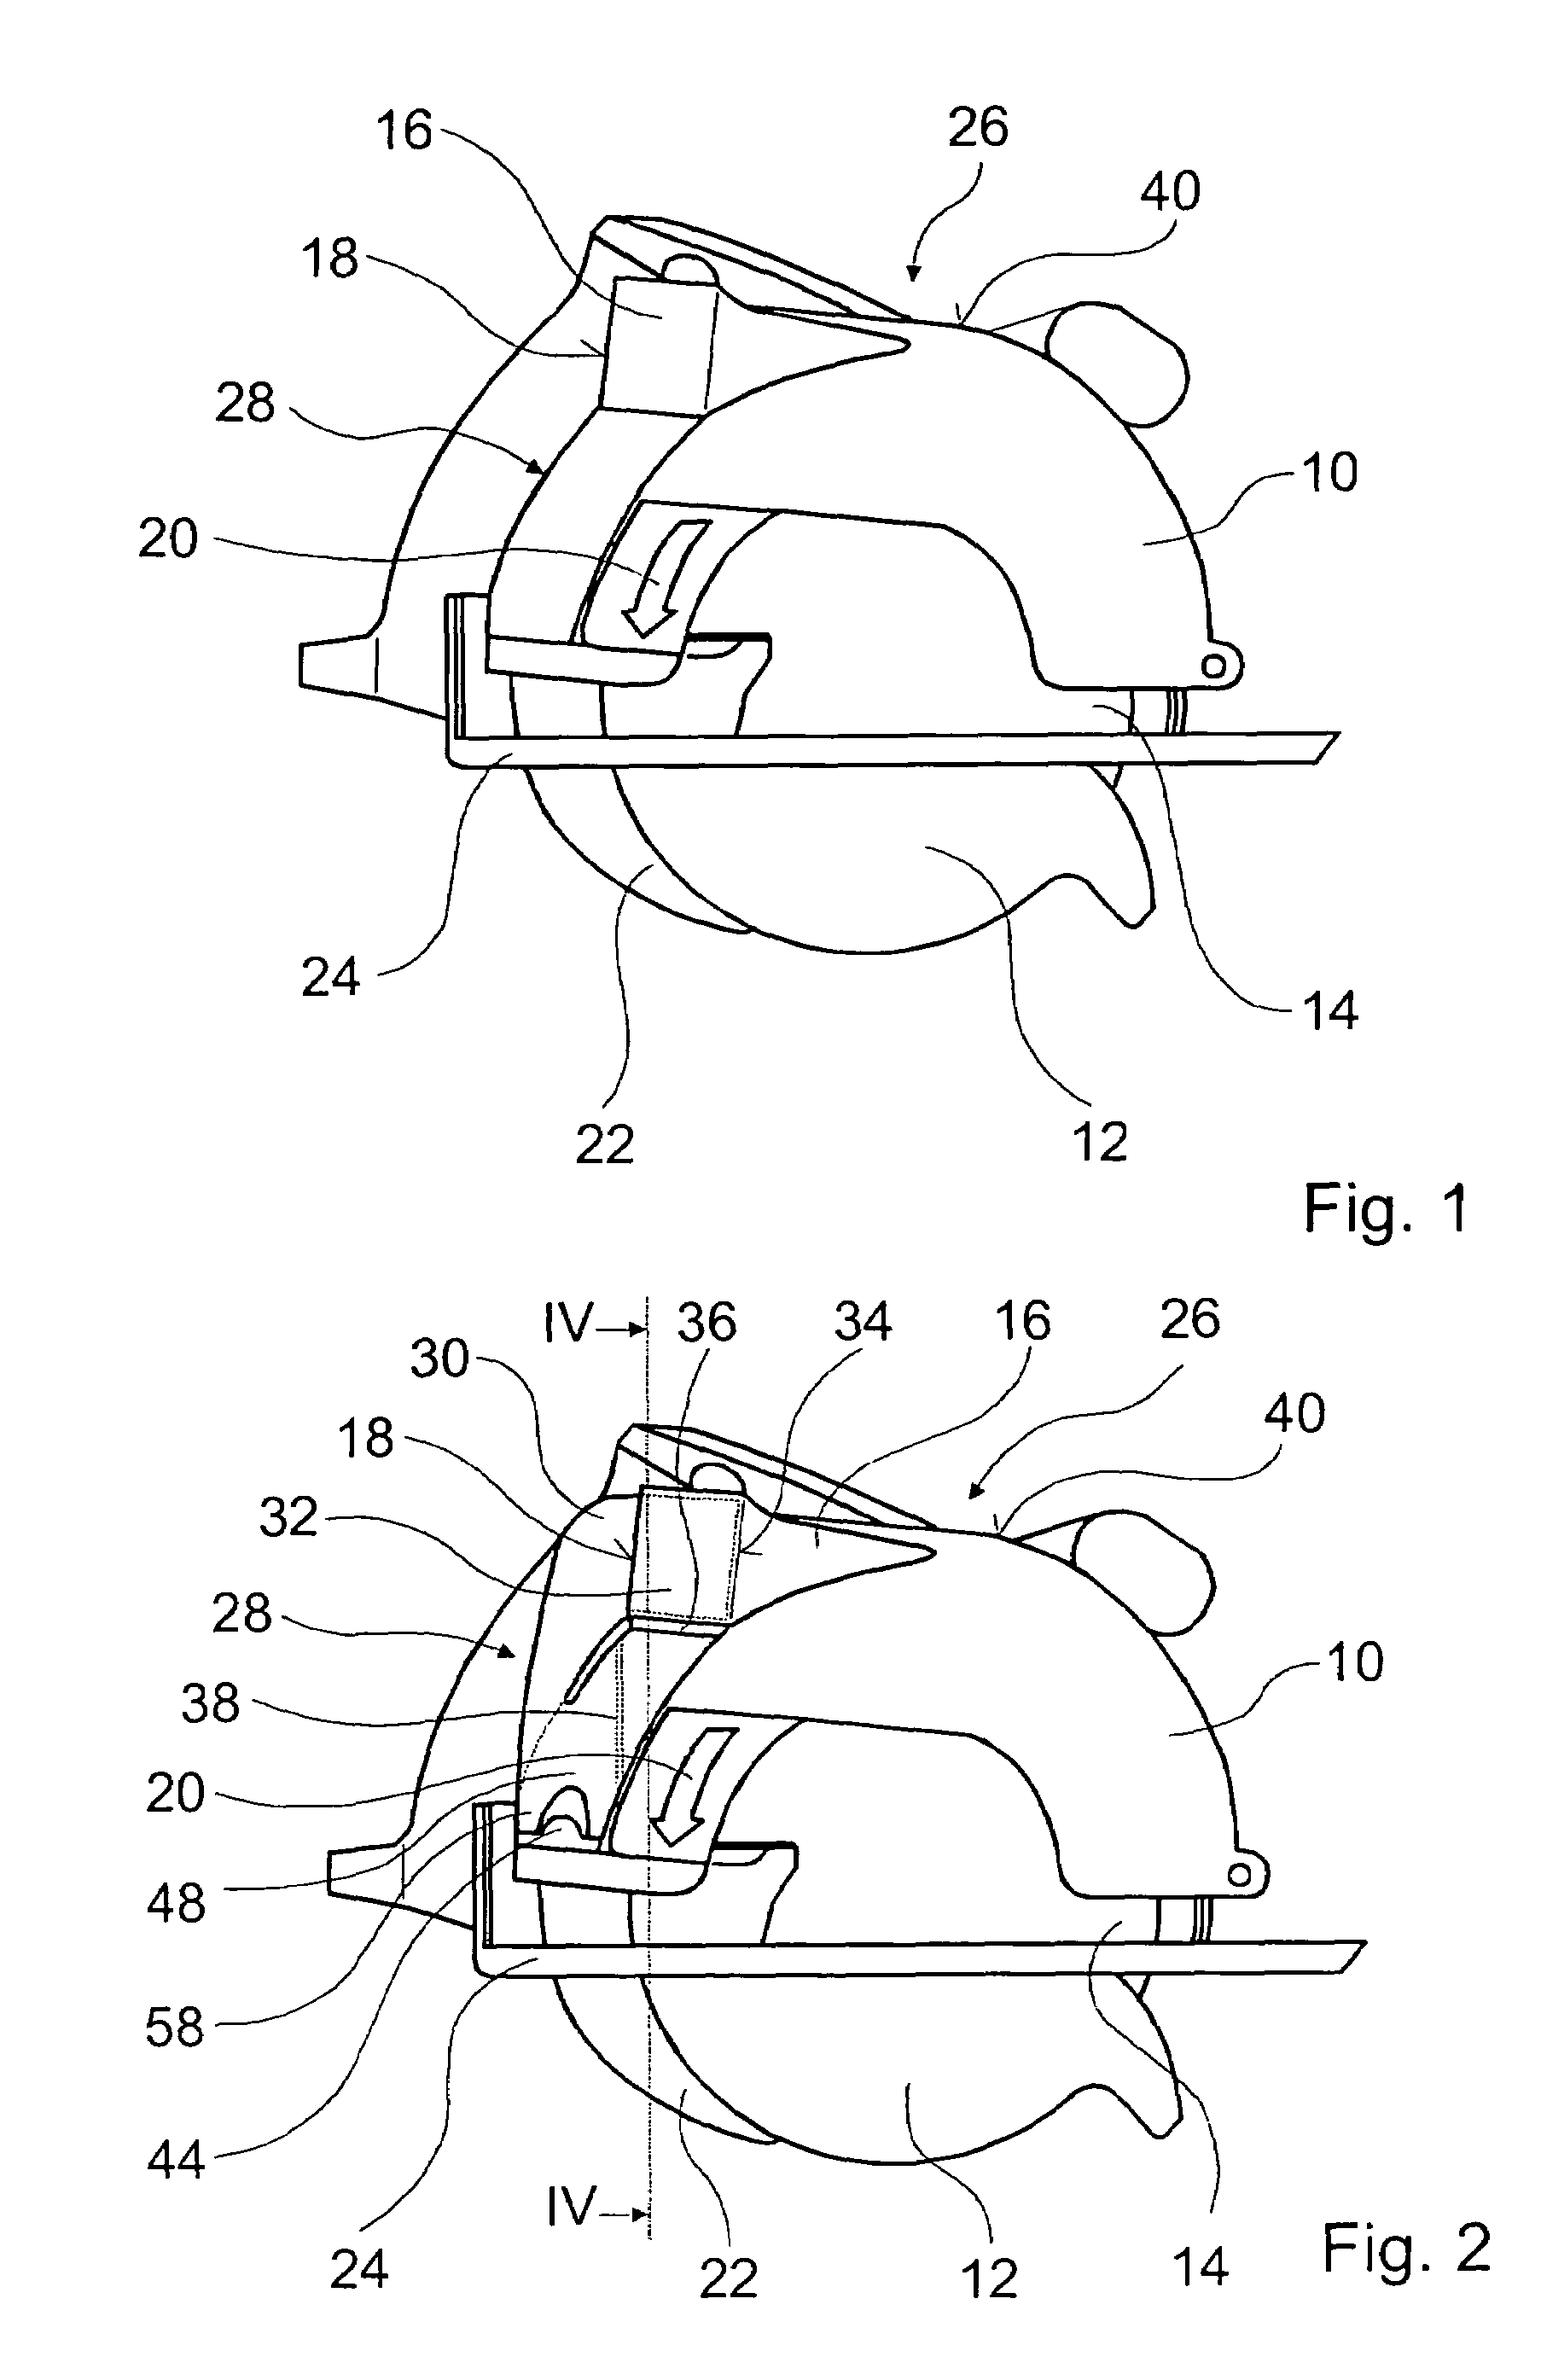 System comprised of a chip catcher and a safety guard for a power tool